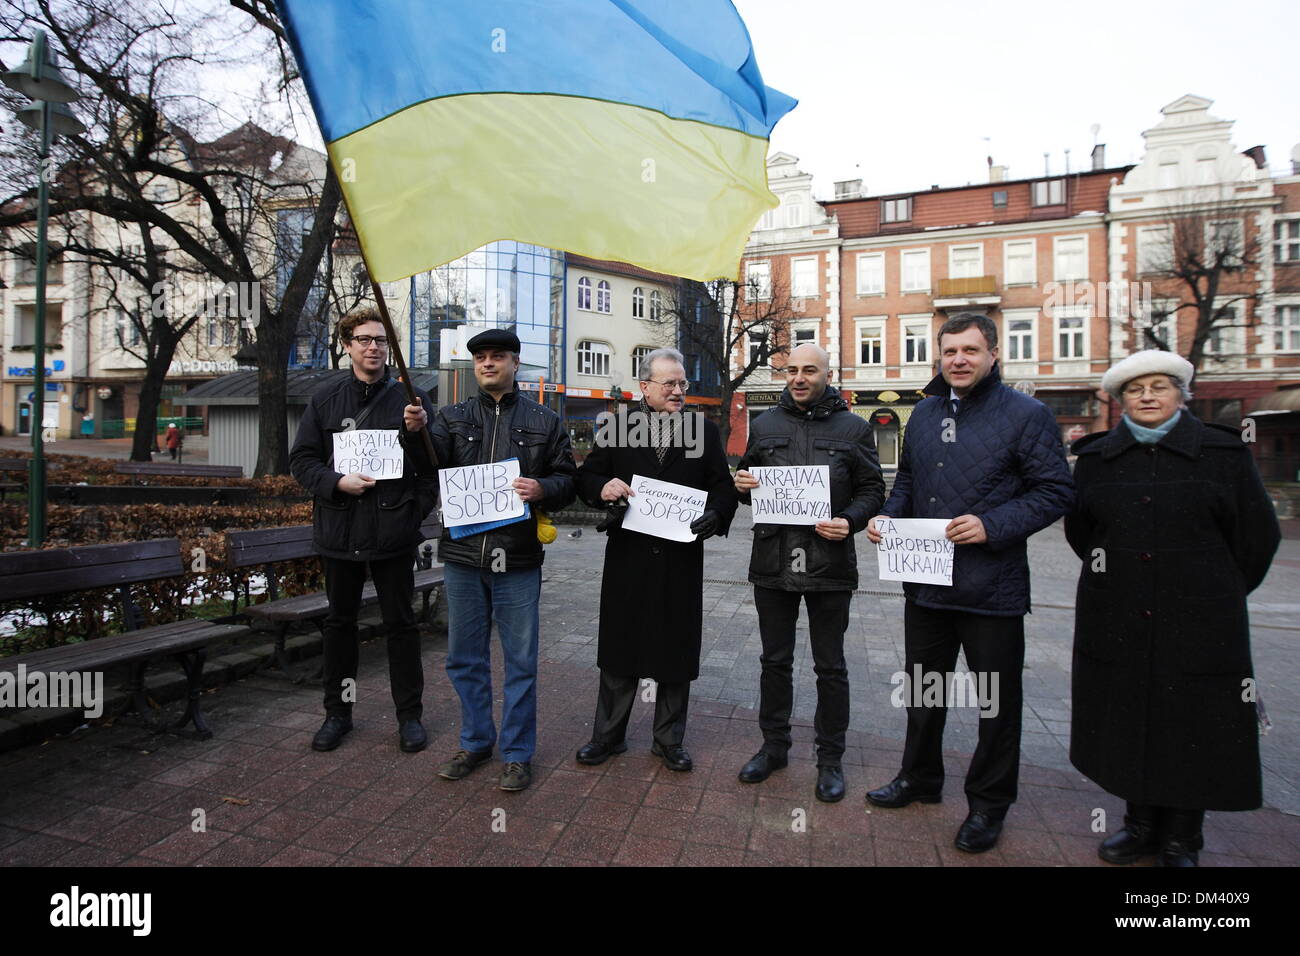 Sopot, Poland. 11th December 2013. Sopot's citizens supports Ukrainian Euromaidan protesters organising picket in city center. Mayor of Sopot Jacek Karnowski (blue jacket) takes part in the picket. Credit:  Michal Fludra/Alamy Live News Stock Photo